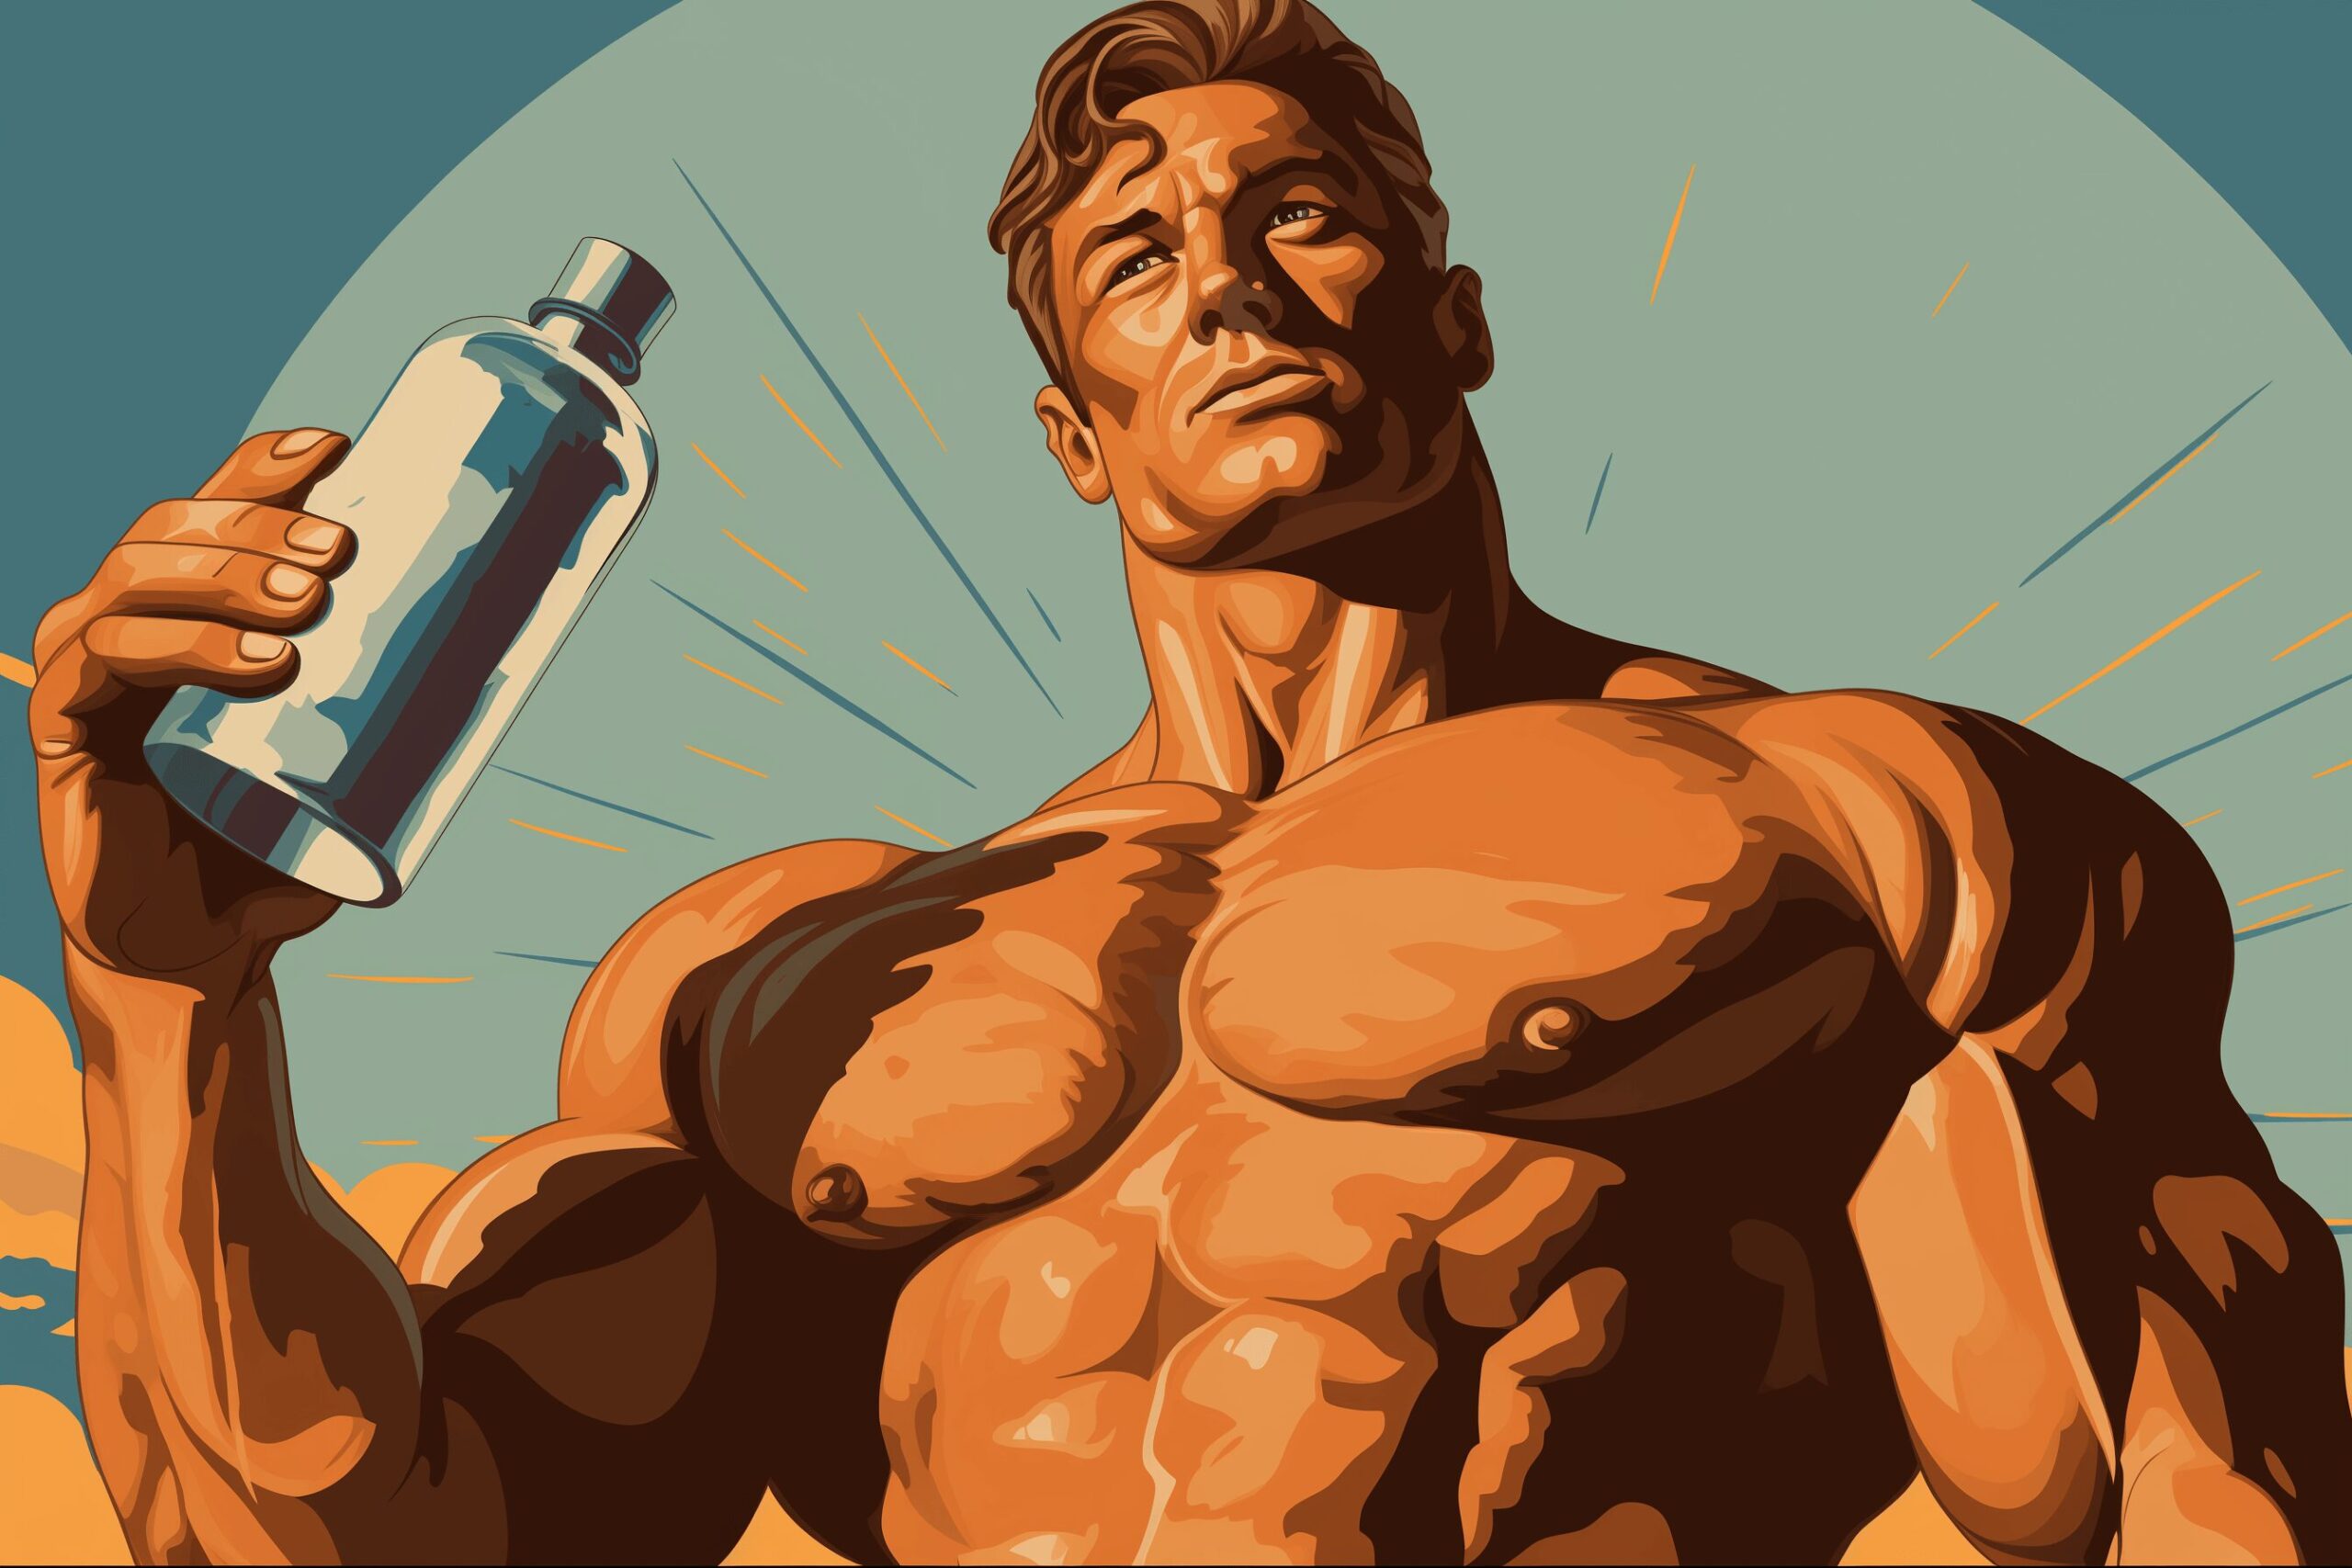 A bodybuilder with a bottle of supplements